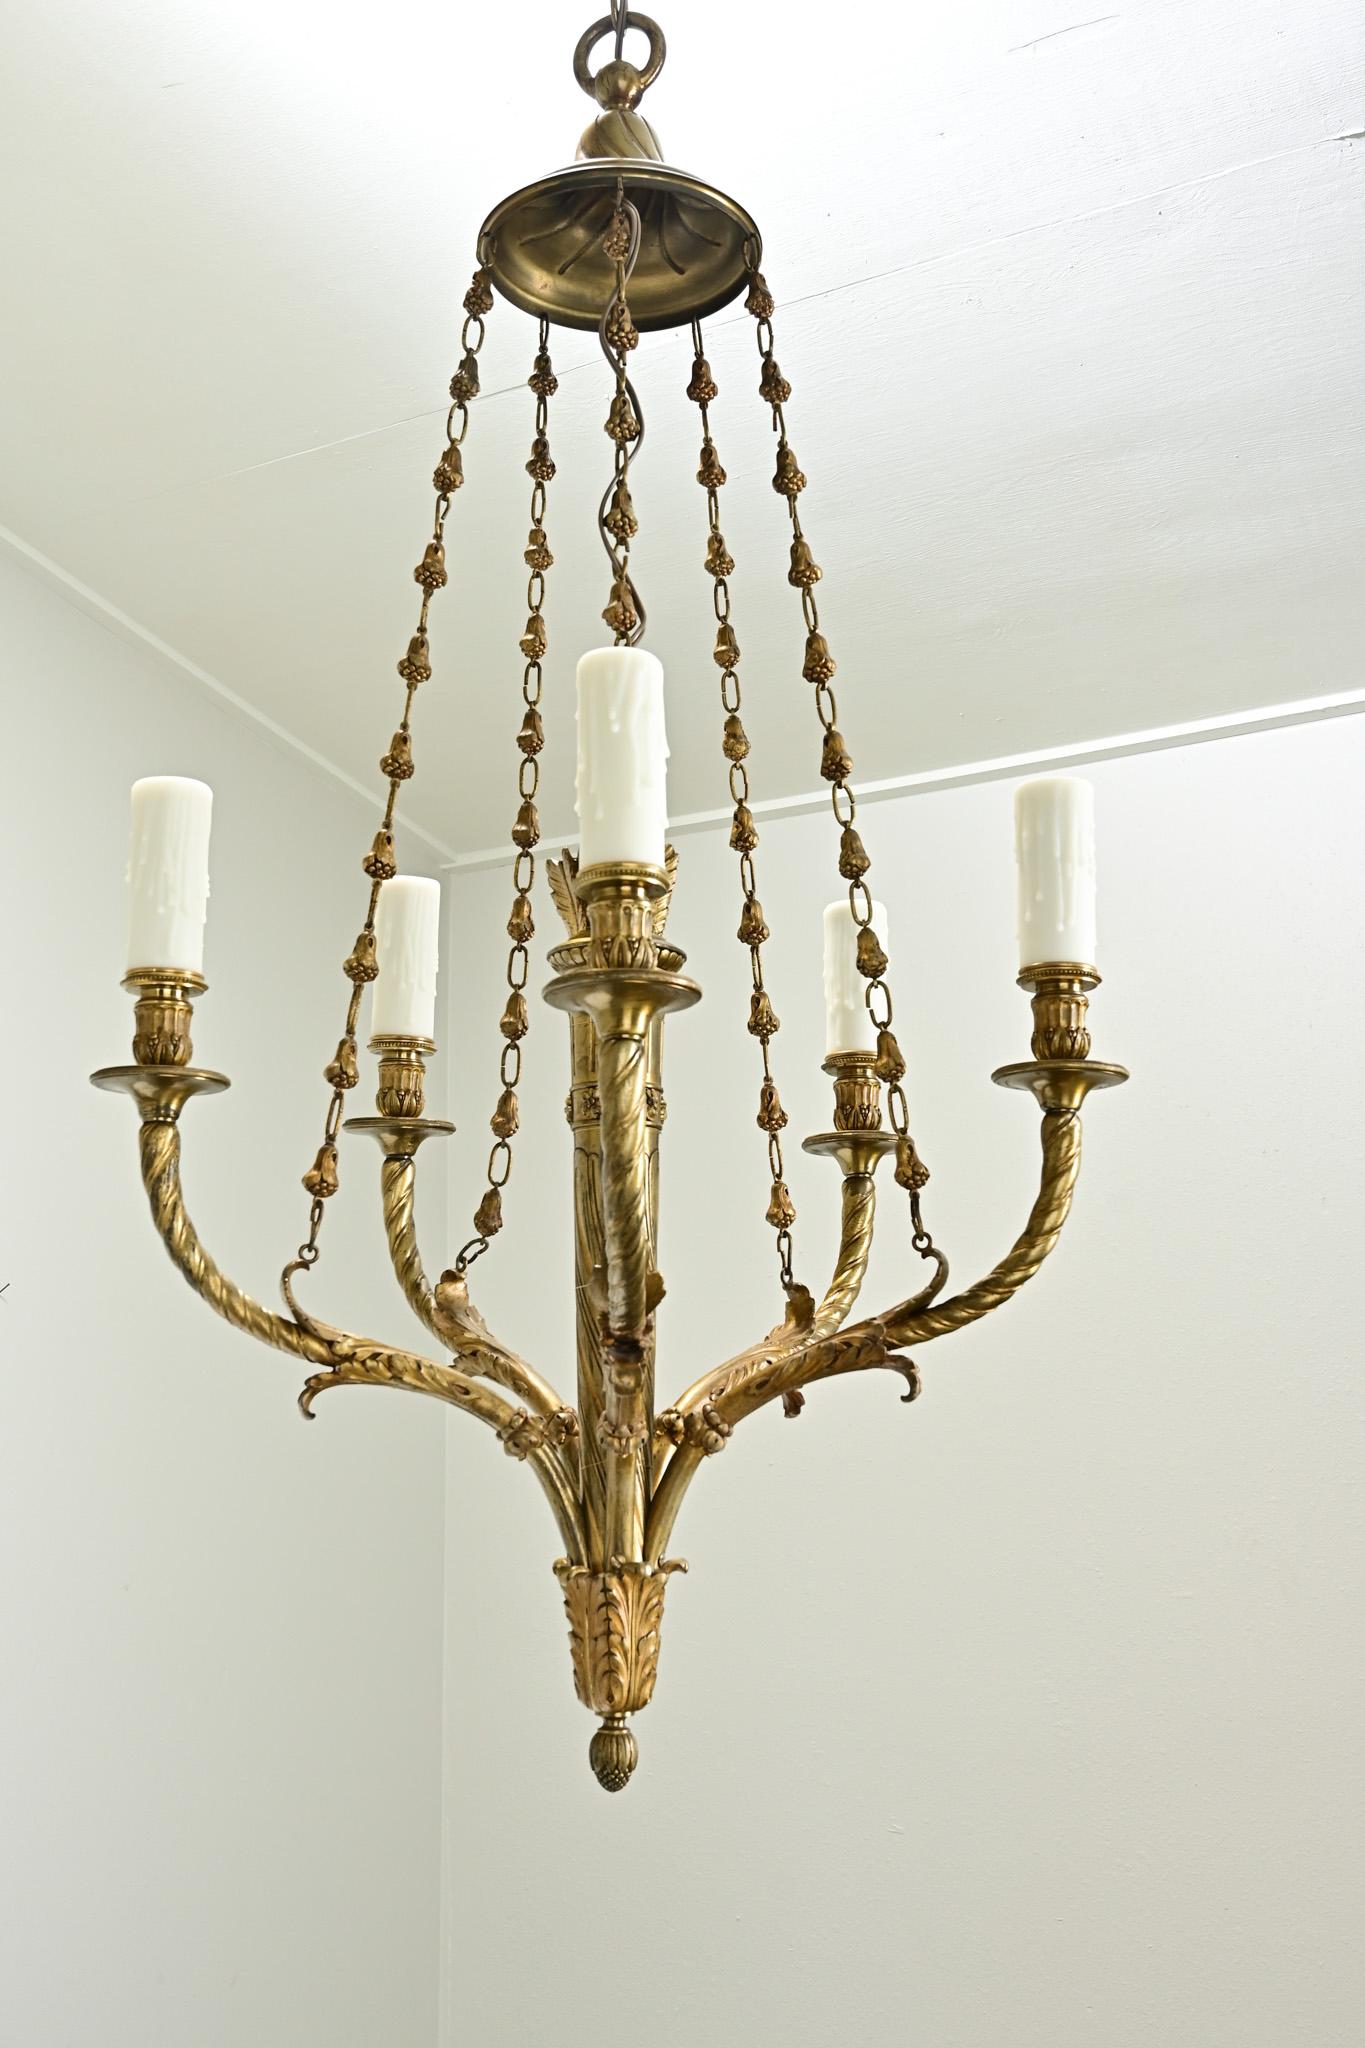 An elegant 5-light Louis XVI style chandelier made in Belgium. This heavy brass light fixture is centered with a brass quiver of arrows and has five long arms ending in candle cups with faux wax candle covers. A decorative chain connects the